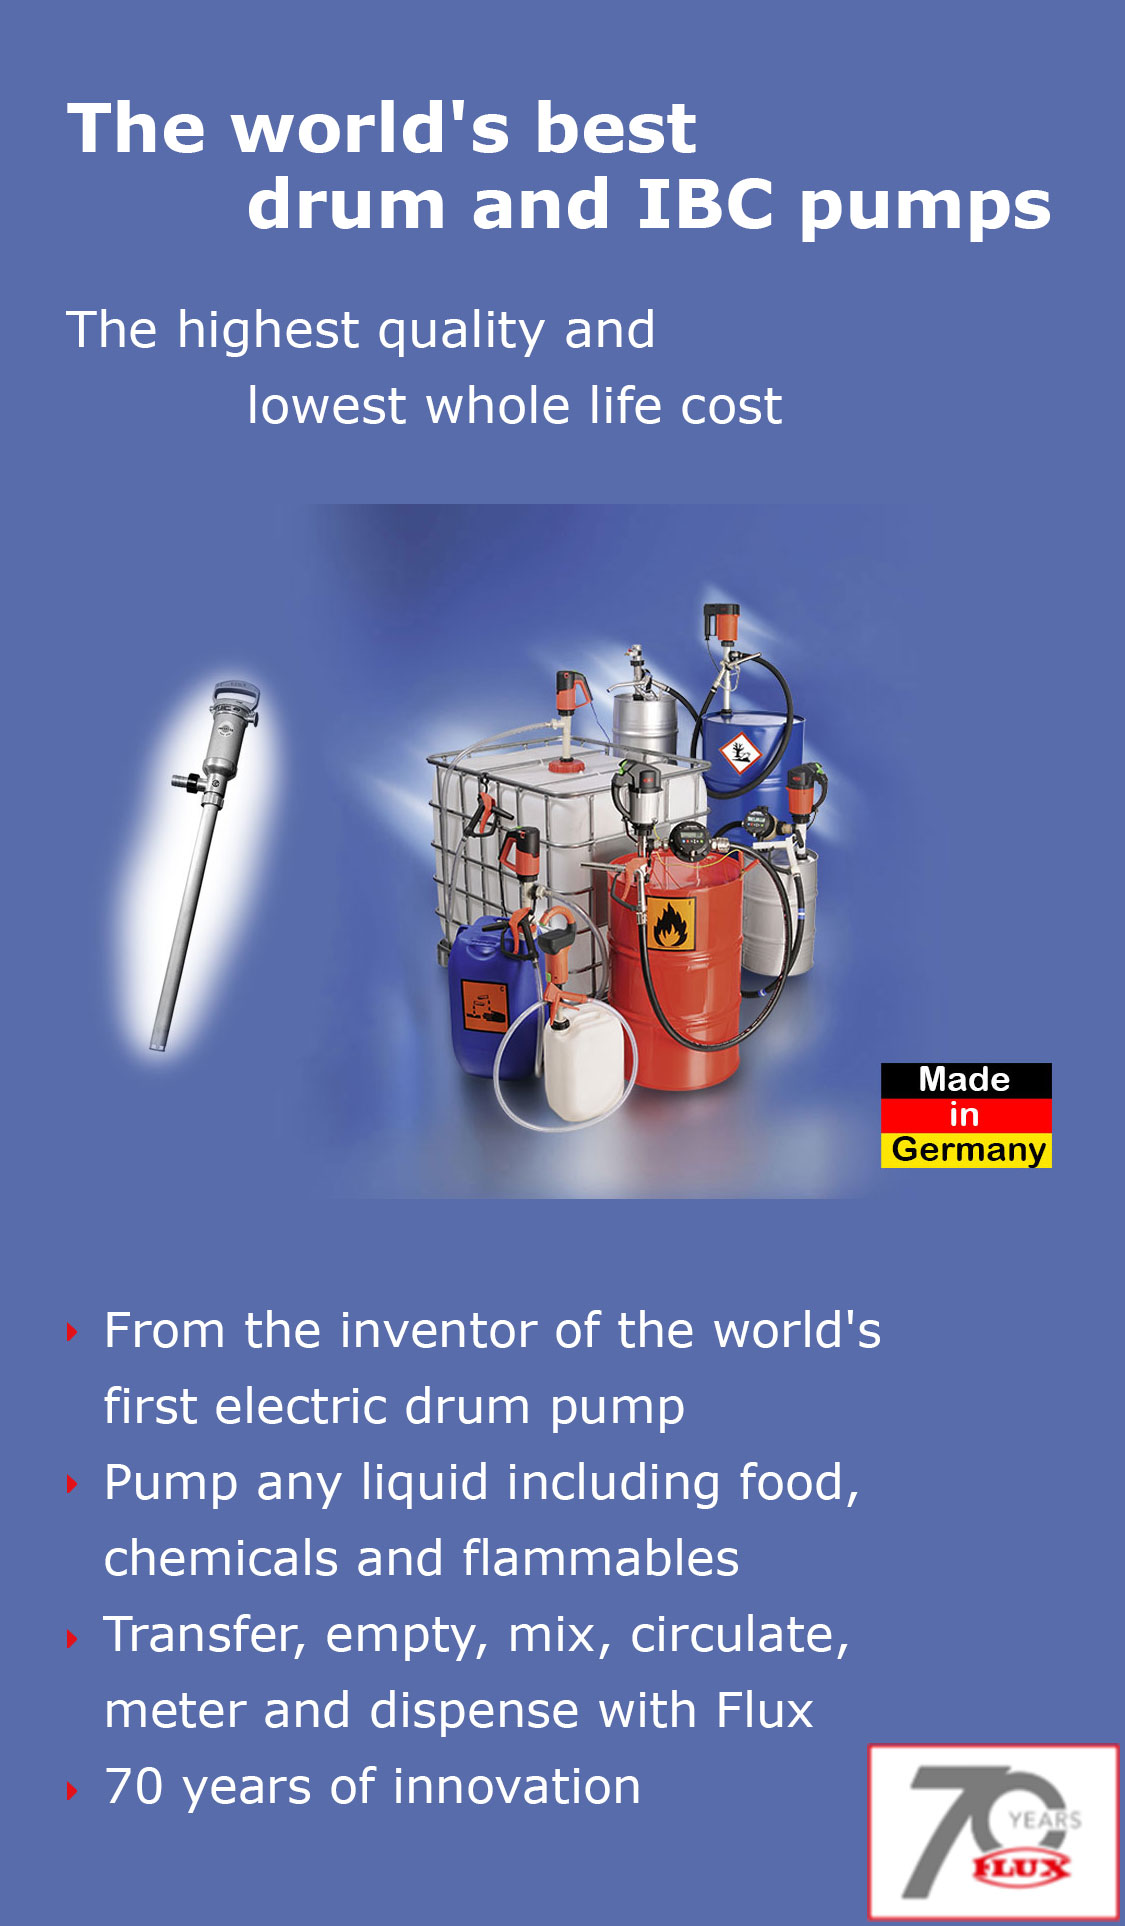 The world's best drum and IBC pumps banner